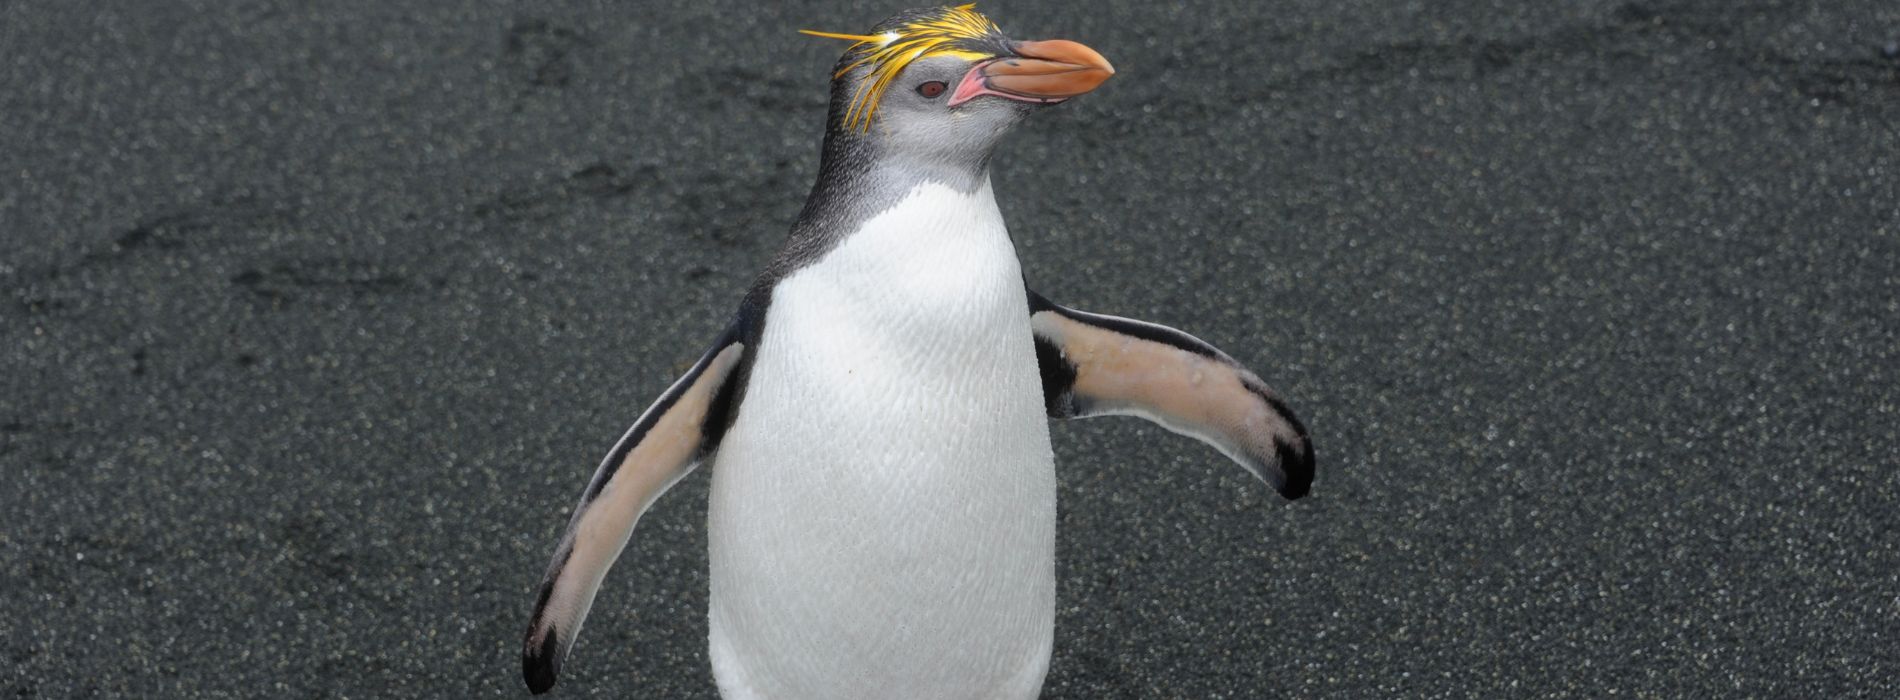 Royal Penguin Biography: The Charming and Quirky Penguins of the Southern Ocean